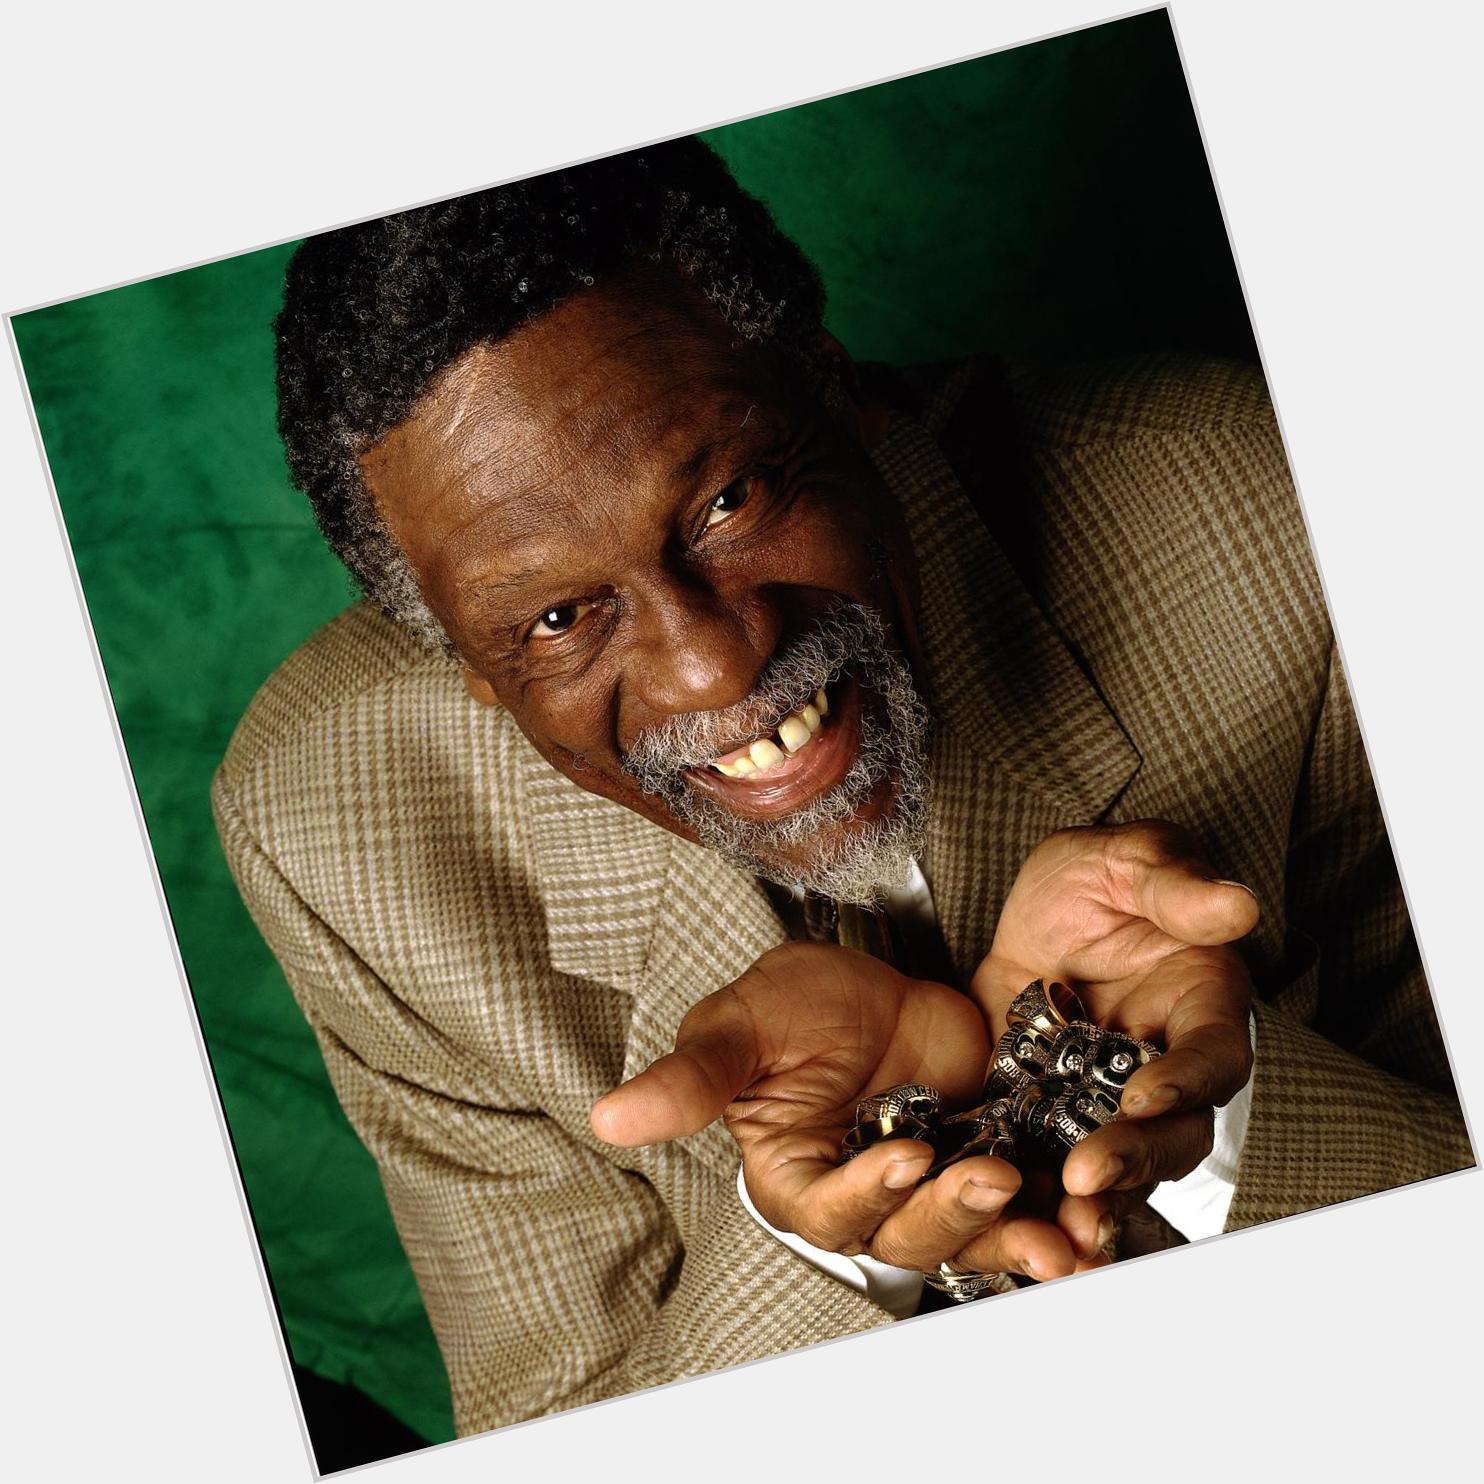 The greatest winner ever. \" Join us in wishing Bill Russell a very Happy 81st Birthday! 